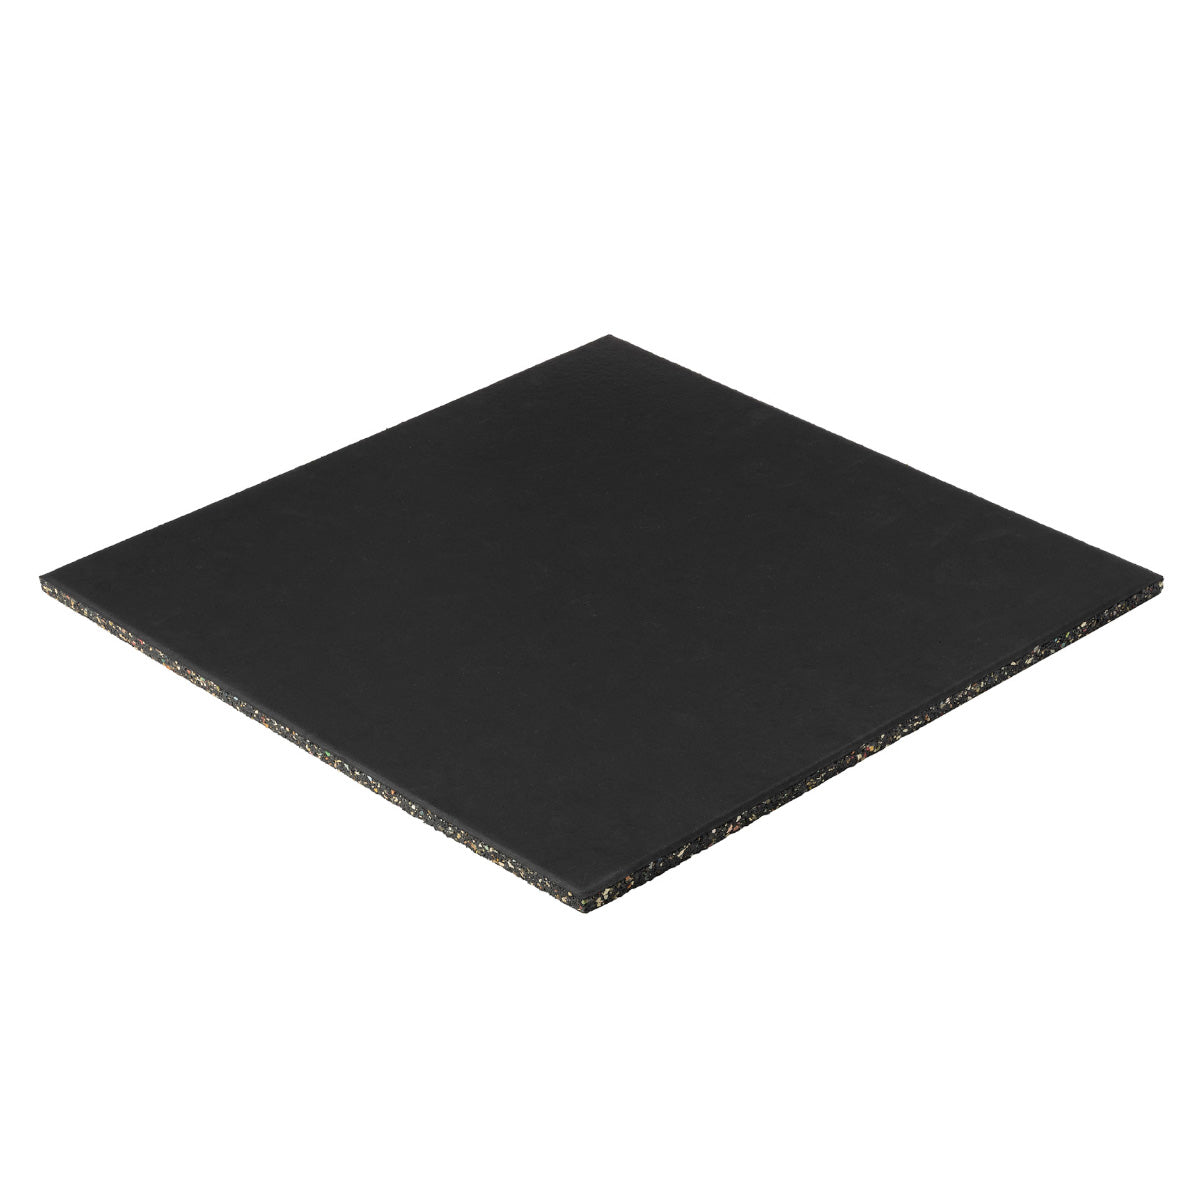 [Cut sample] Rubber mat for gym